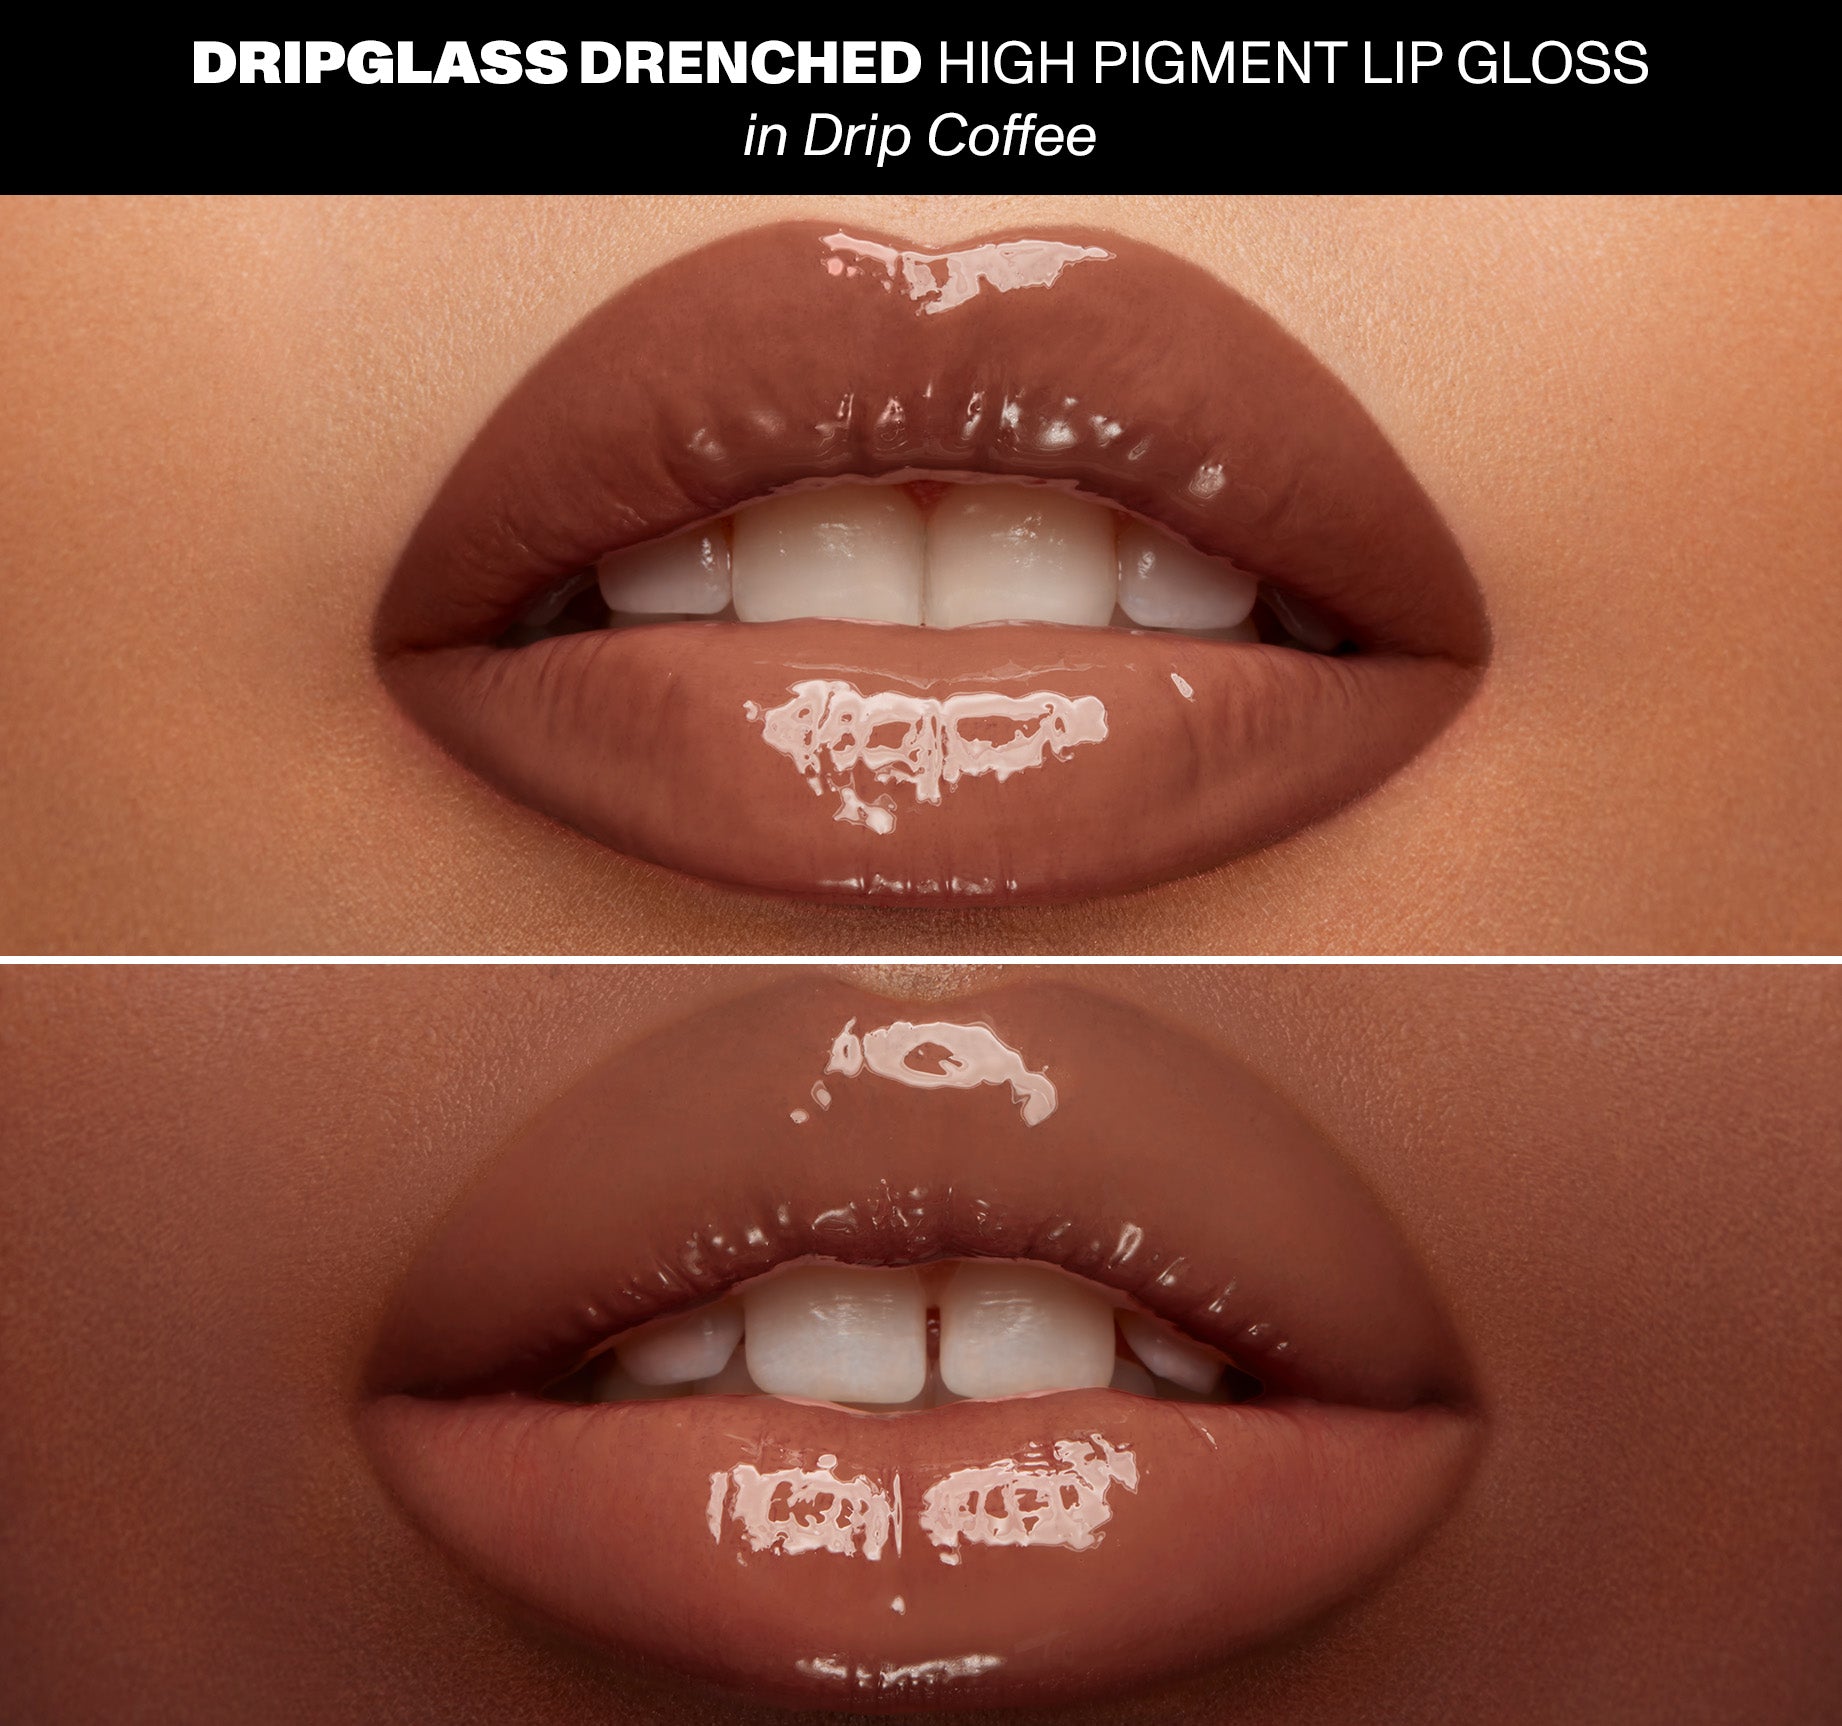 Dripglass Drenched High Pigment Lip Gloss - Drip Coffee - Image 3